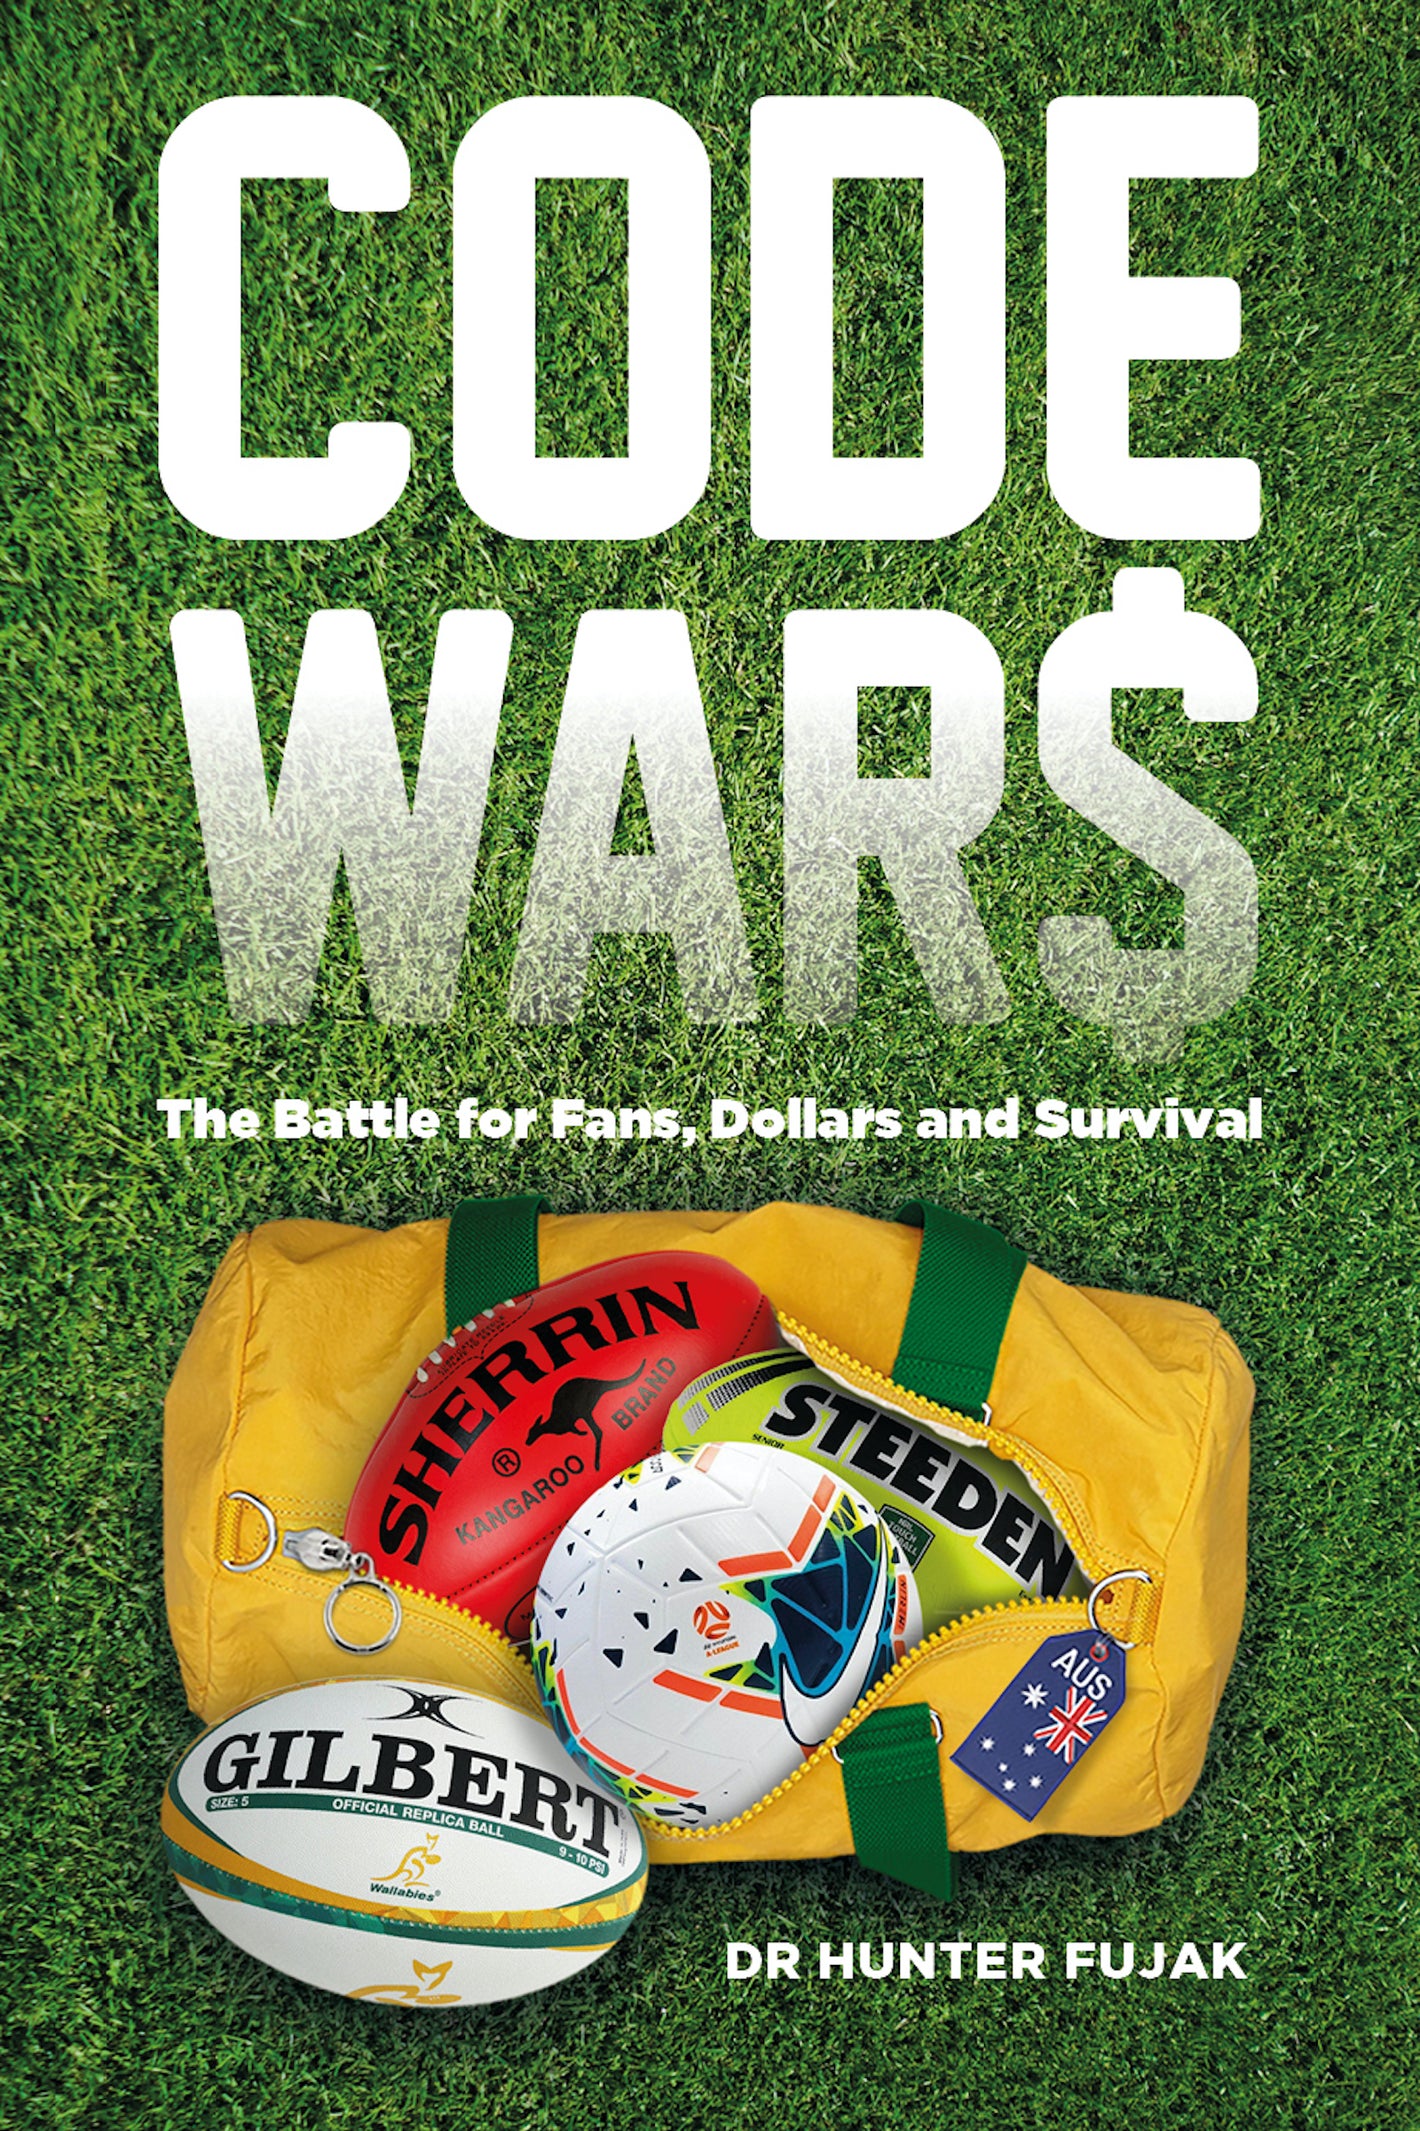 Code Wars - The Battle for Fans, Dollars and Survival - test18Aug